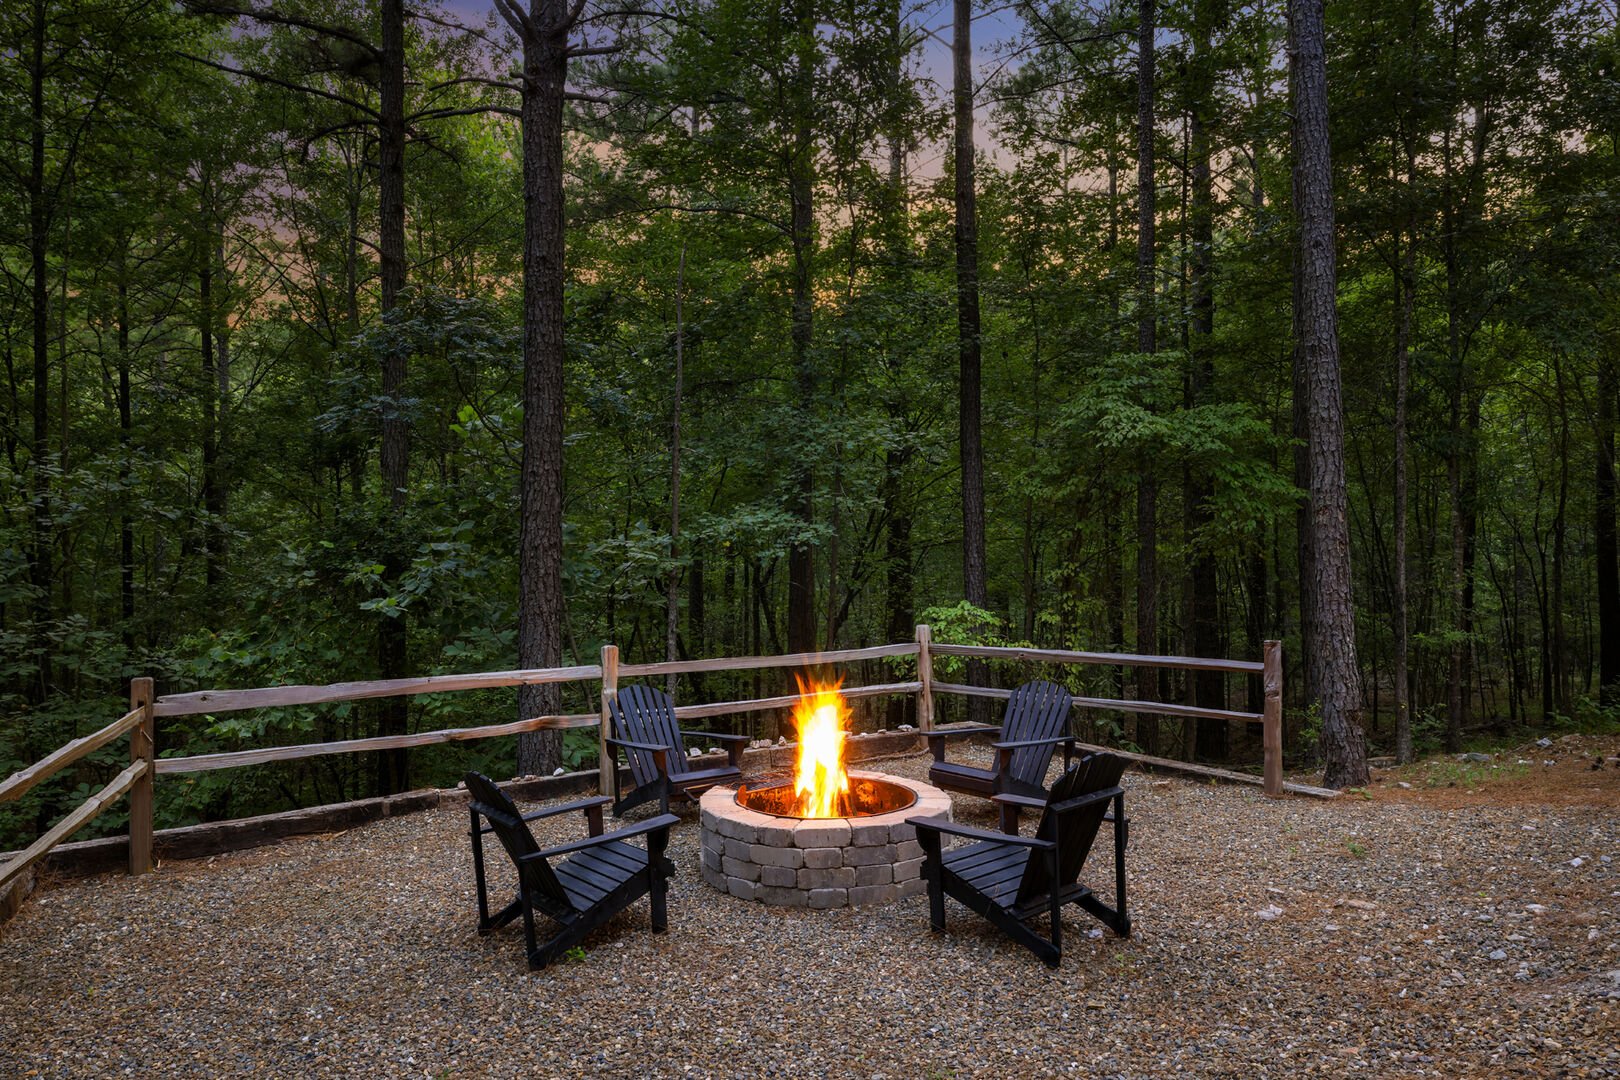 Fire pit with firewood provided